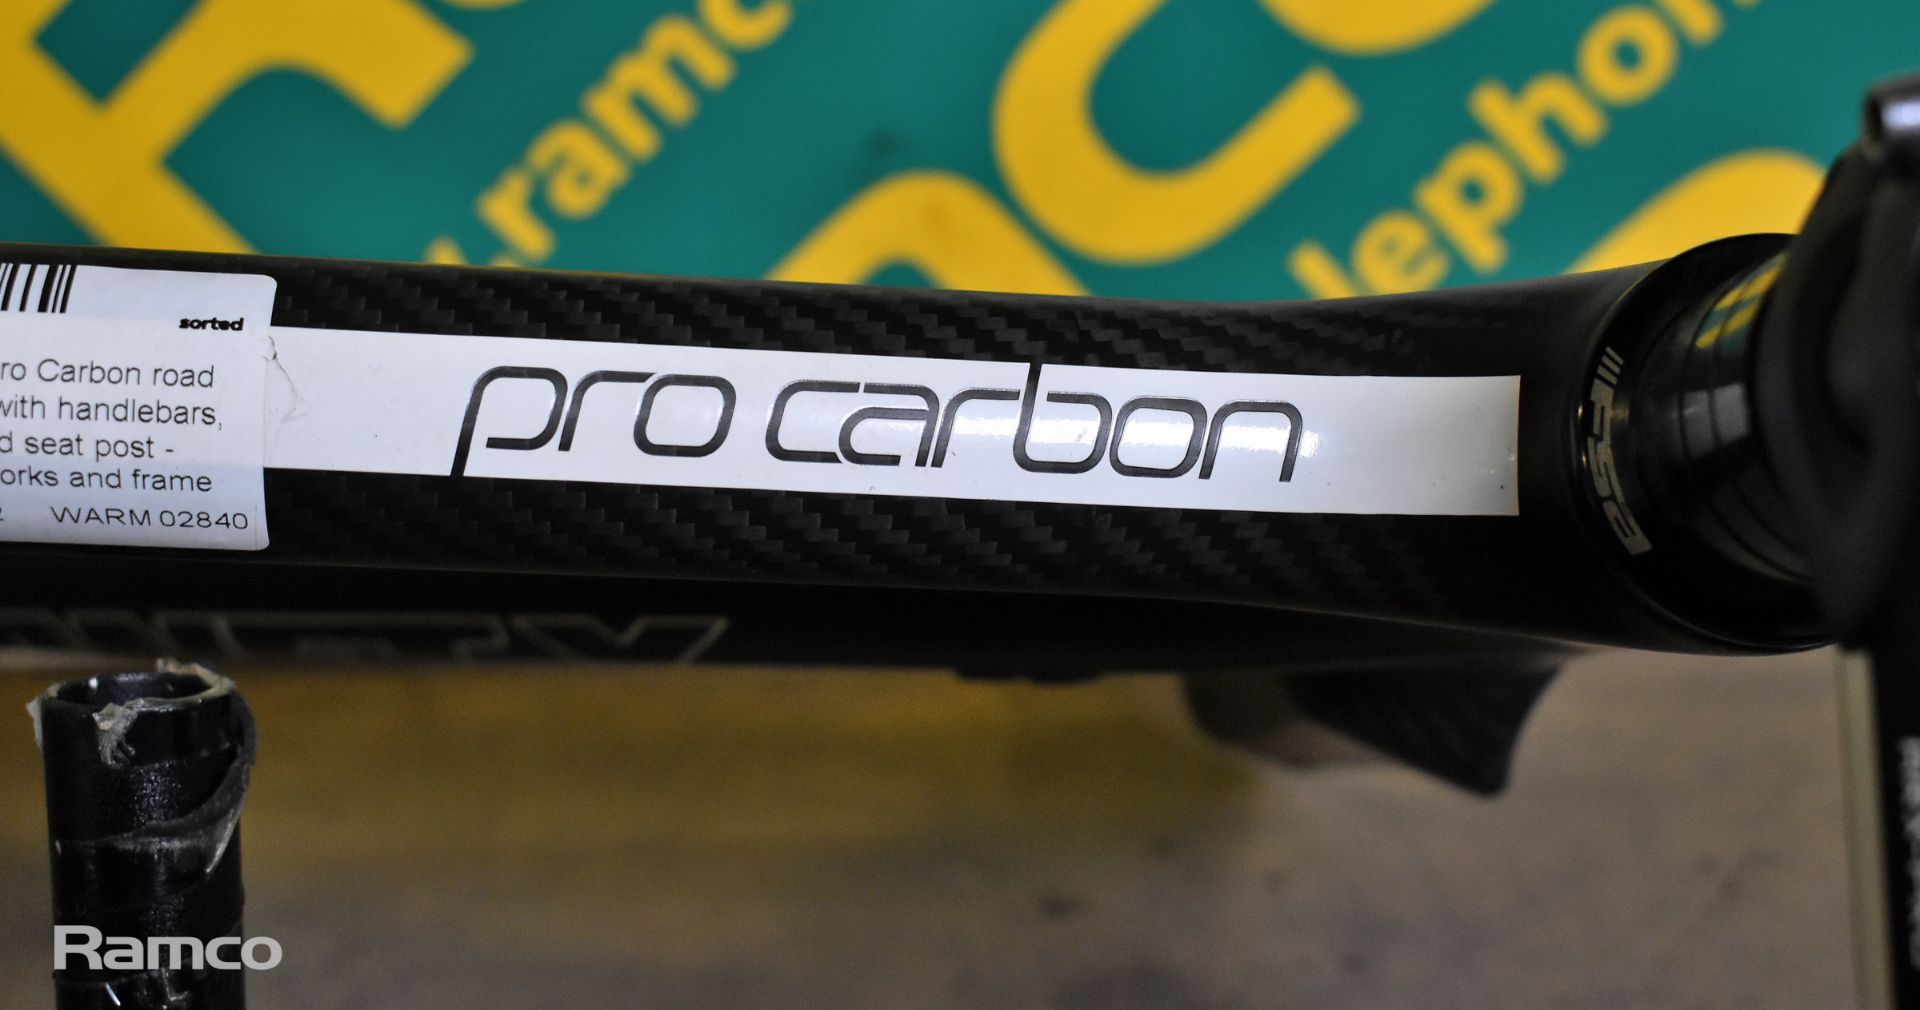 Planet X Pro Carbon road bike frame with handlebars, forks and seat post - damaged forks and frame - Image 7 of 7